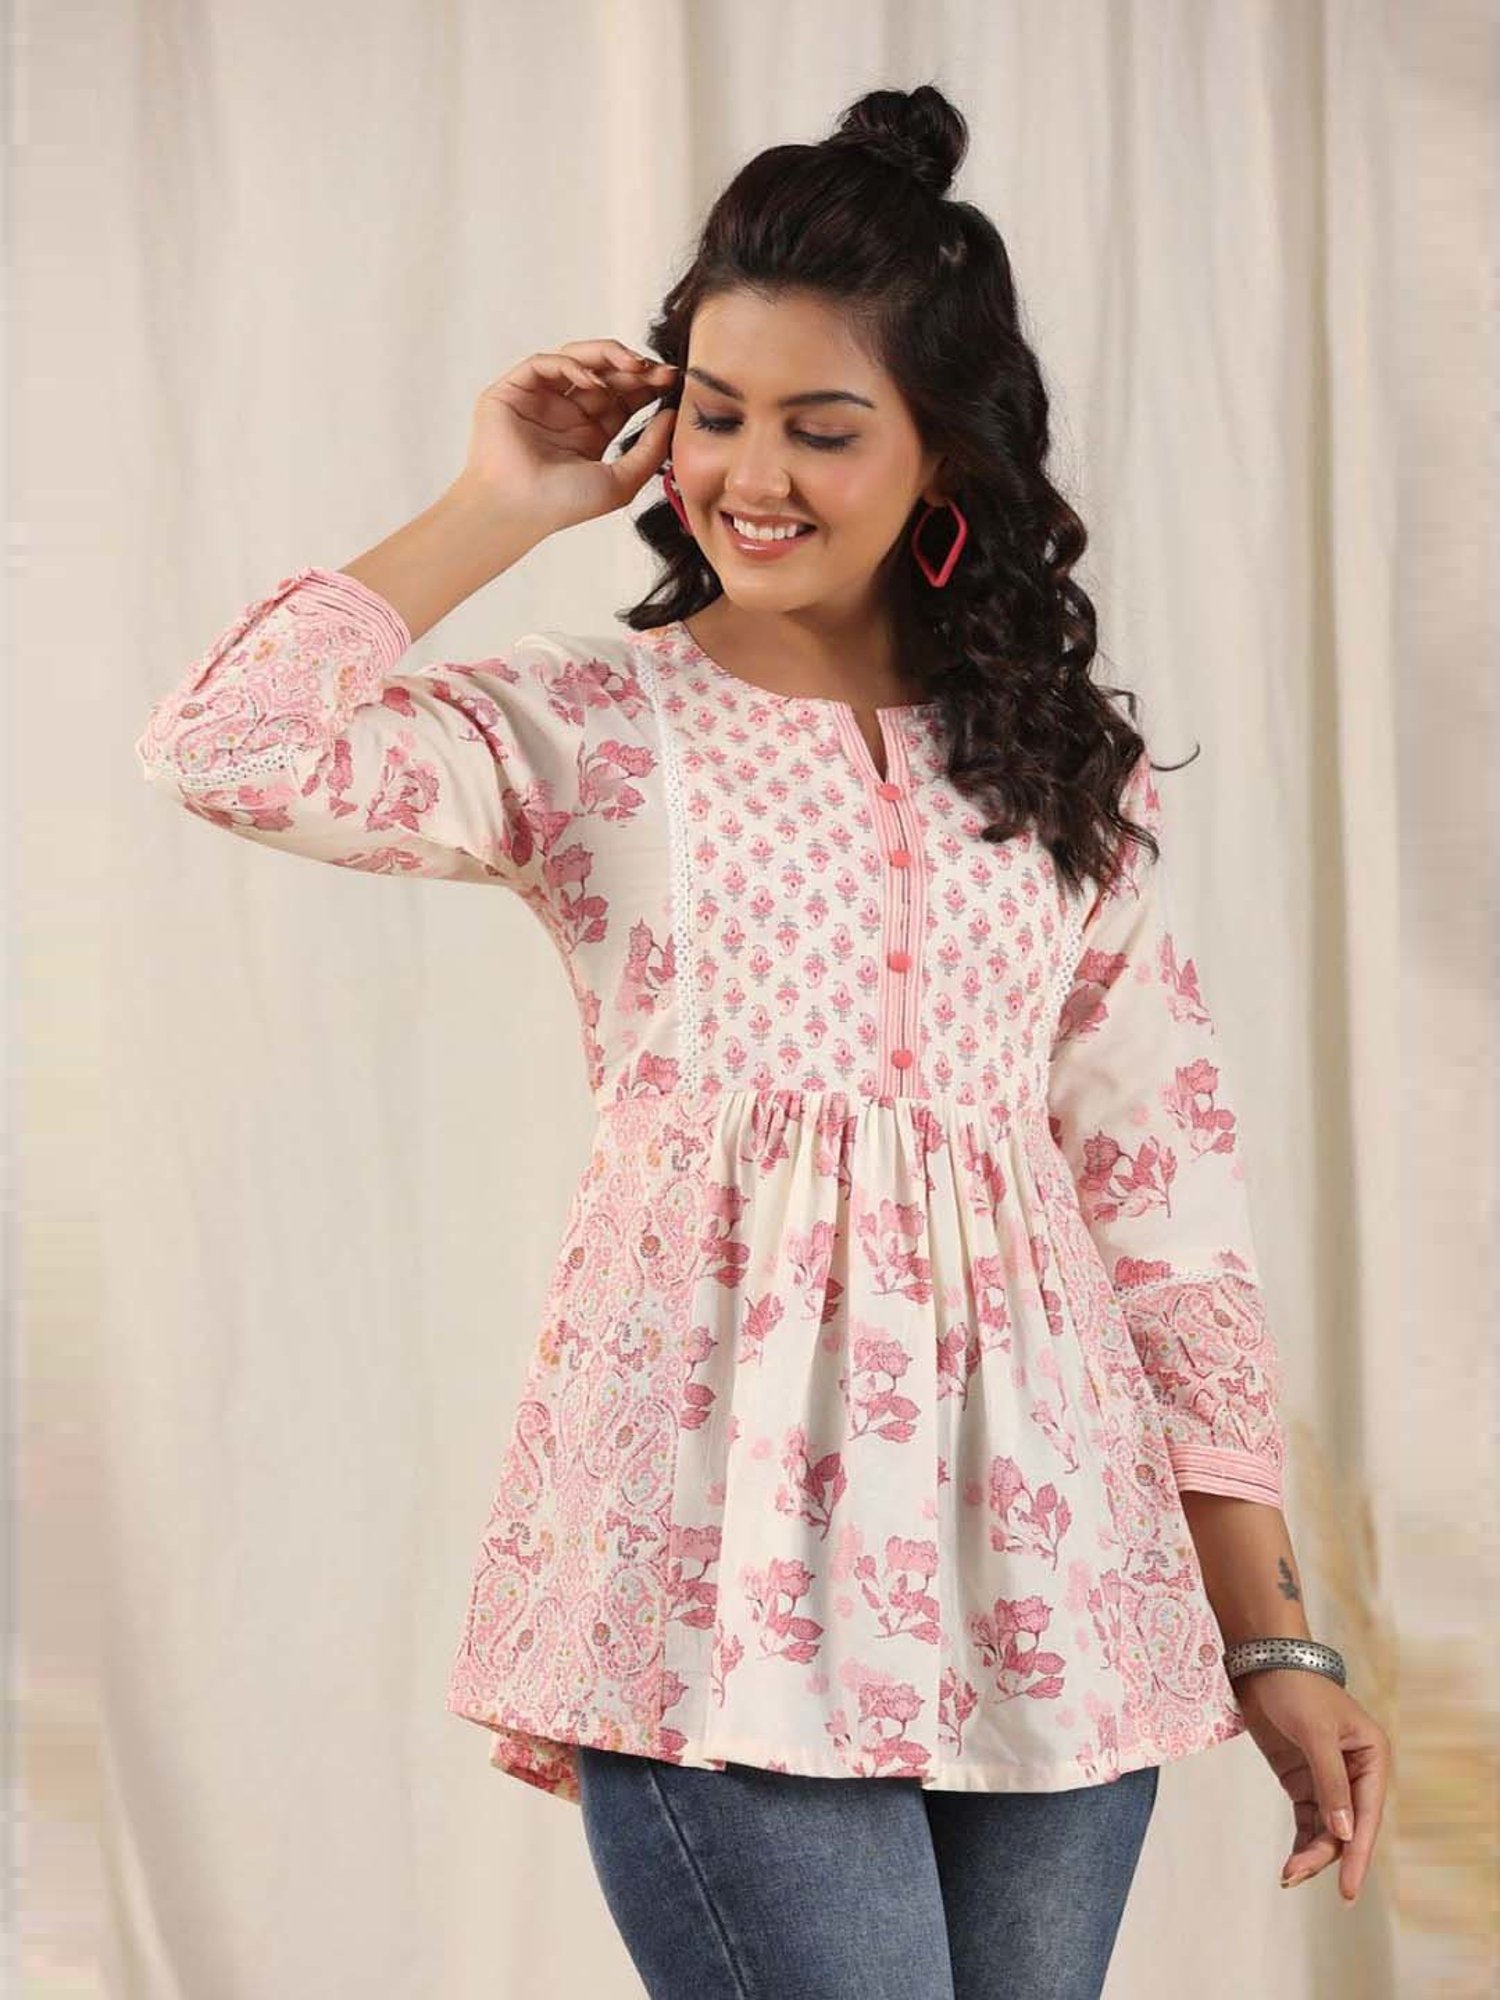 Straight soft joergate Fabric-soft Short kurtis, Size: 38-44 at Rs 450 in  Thane